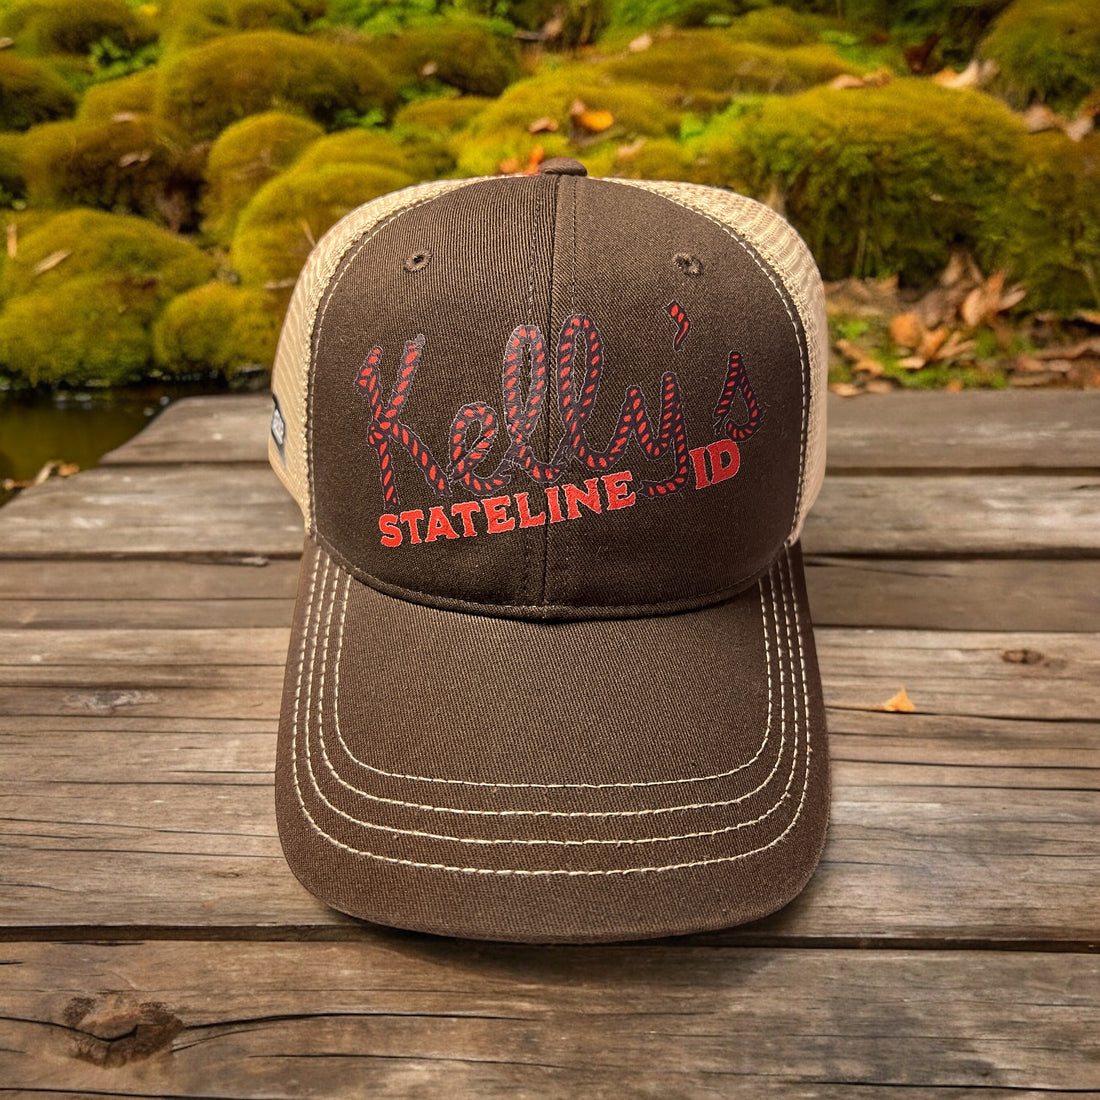 Image of the Kelly Hughes Band Signature Cap, featuring the band's embroidered logo on a classic cap, perfect for adding sophistication to any outfit.